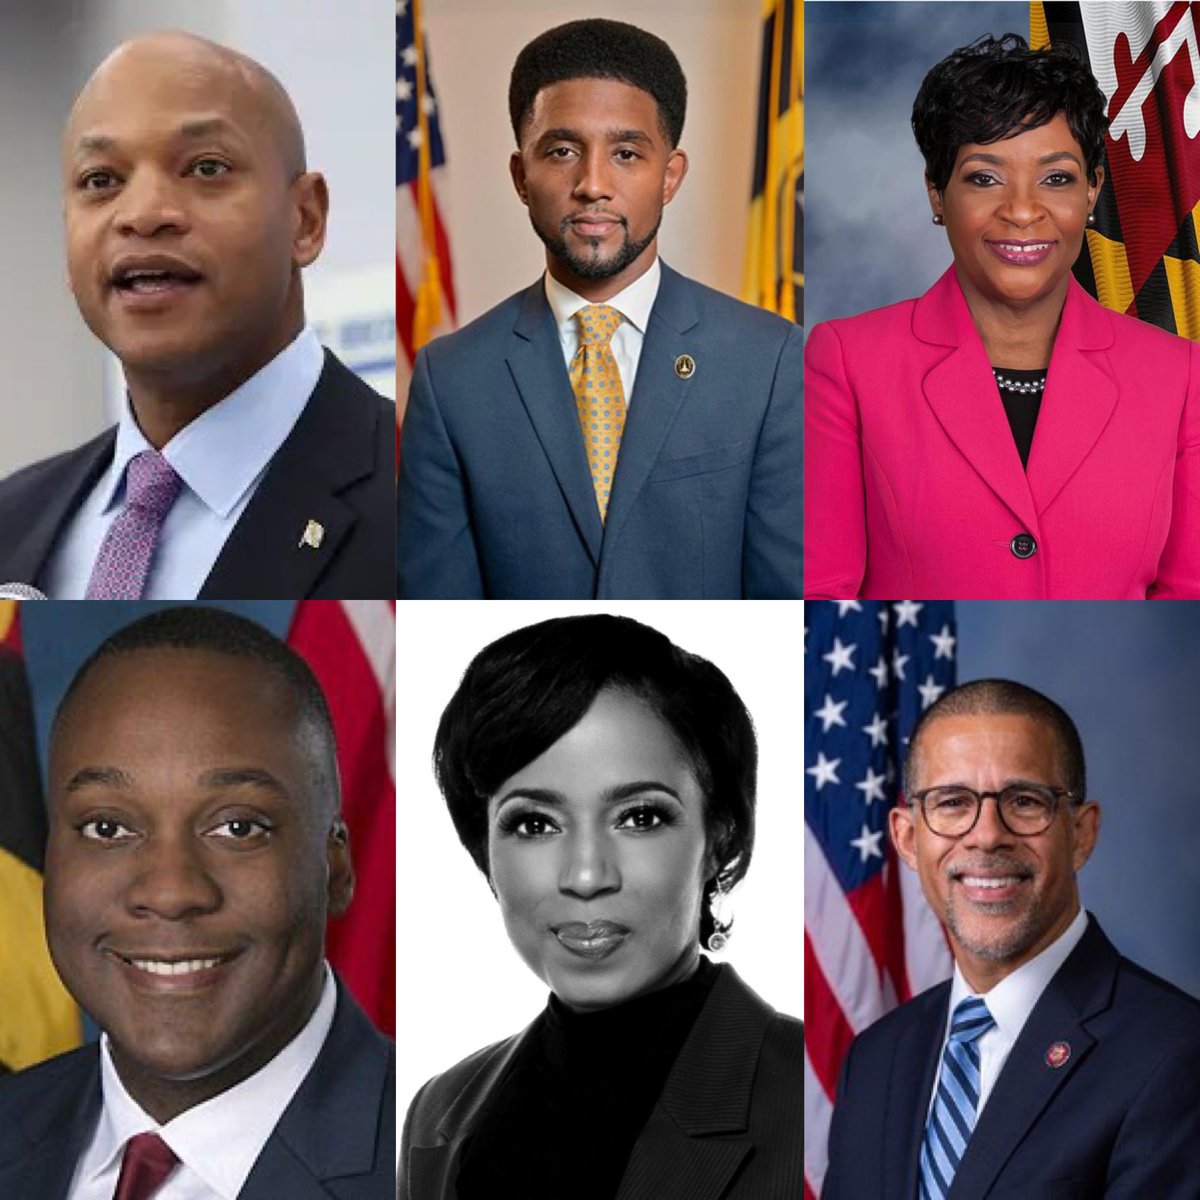 The DEI-Klan is so mad that Maryland has a Black Governor, a Black Mayor of Baltimore City. Just wait until they find out we have a Black Speaker of the House of Delegates, 2 Black County Execs and a Black Attorney General. 

All Elected by the people. Stay mad!